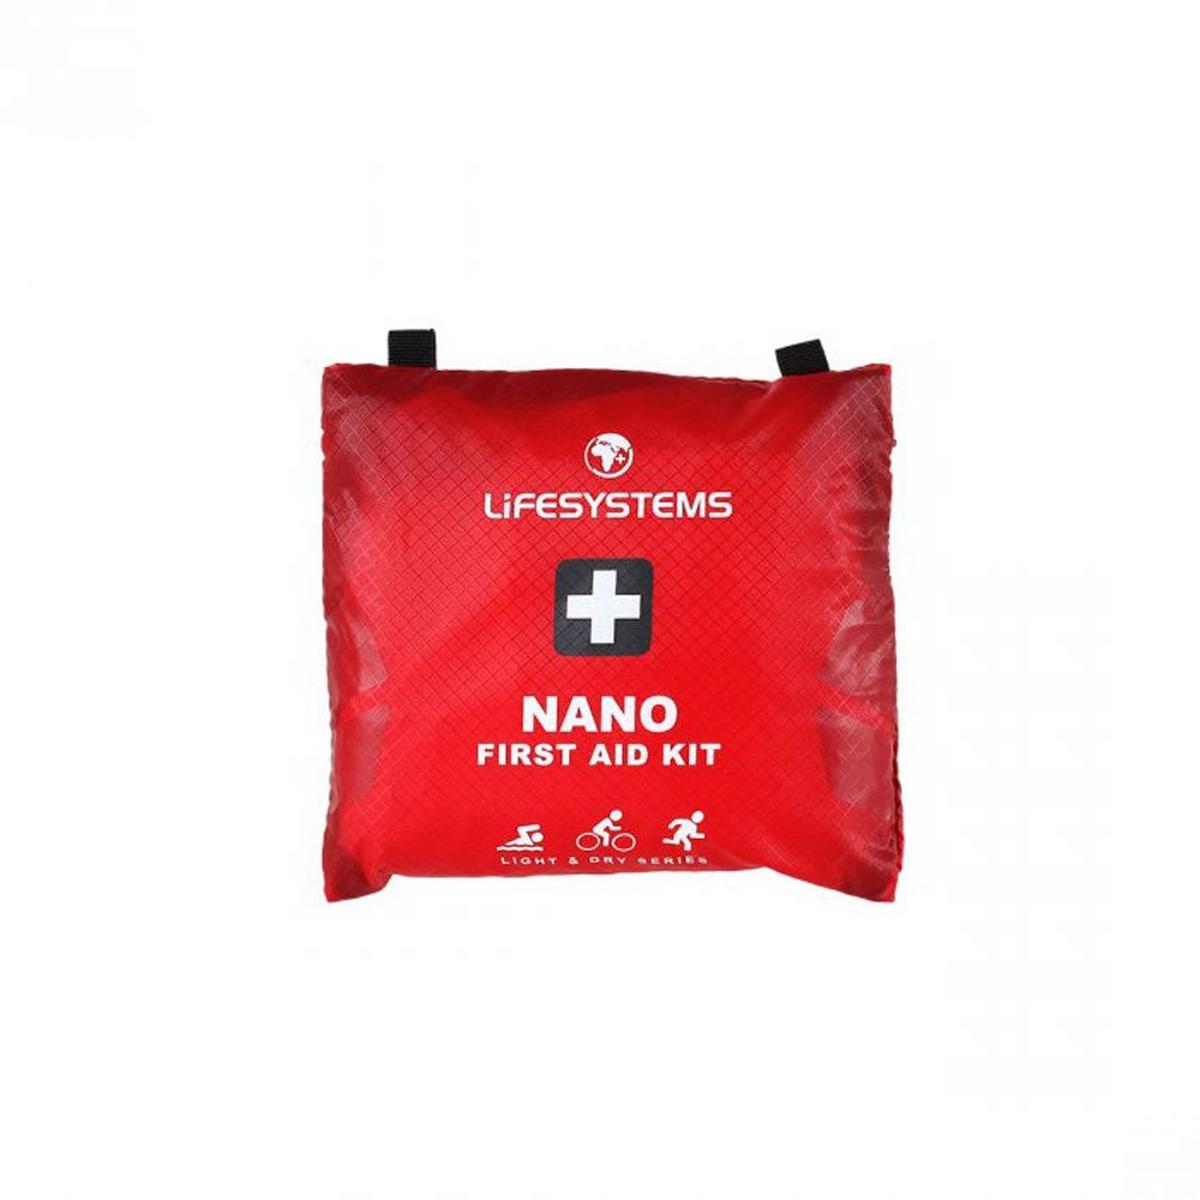 Lifesystems First Aid Kit: Light and Dry Nano